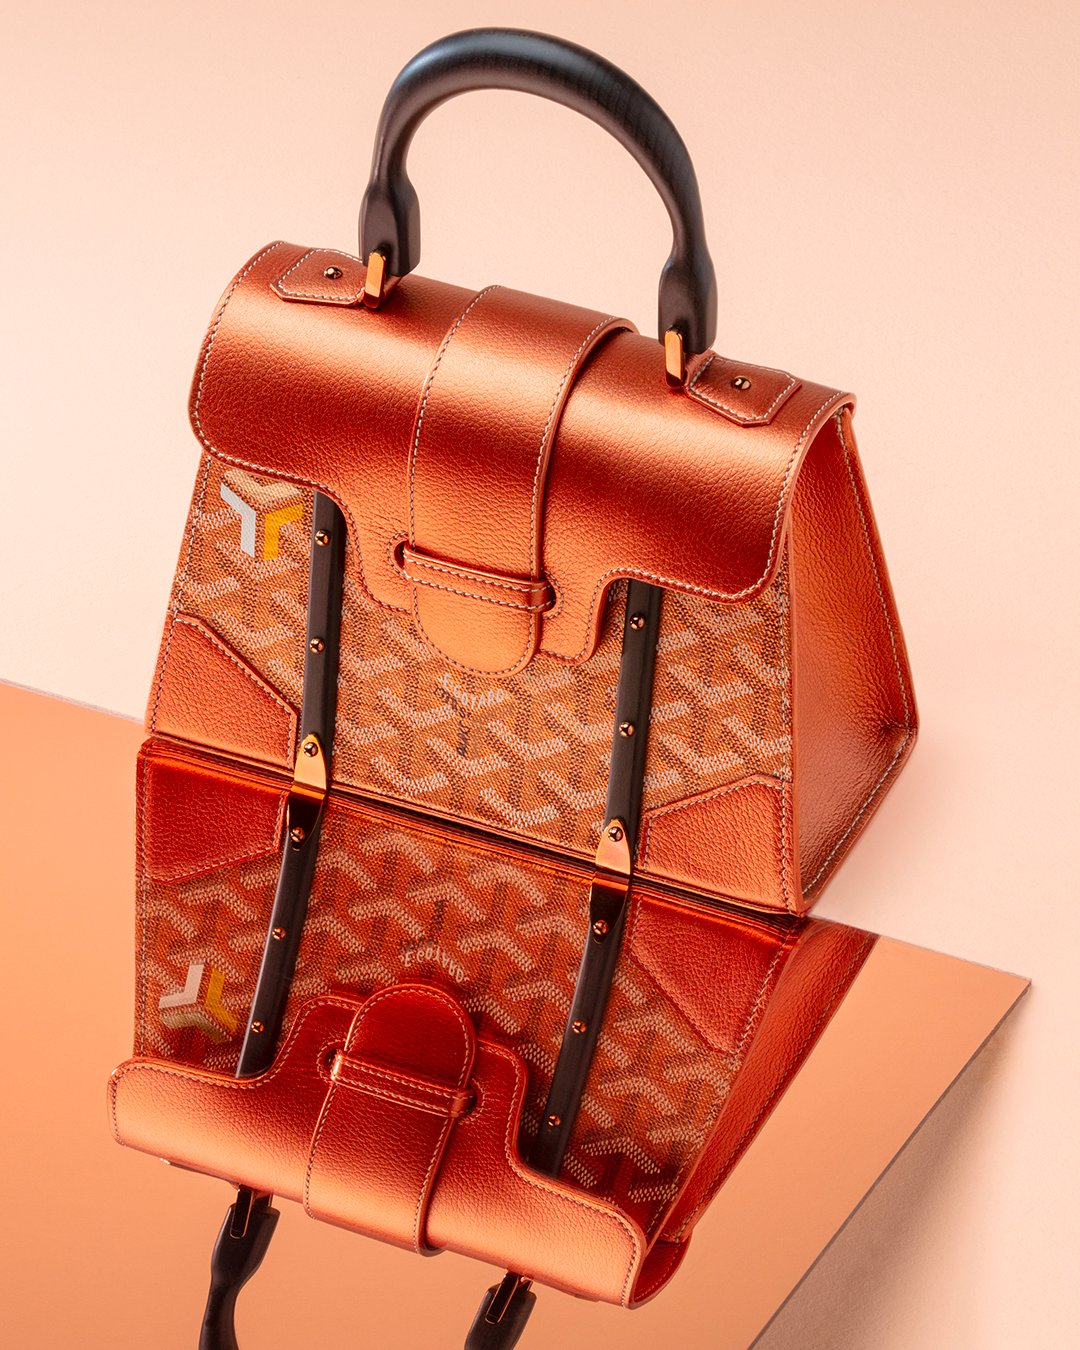 All You Need To Know About Goyard's Mini Structured Saigon